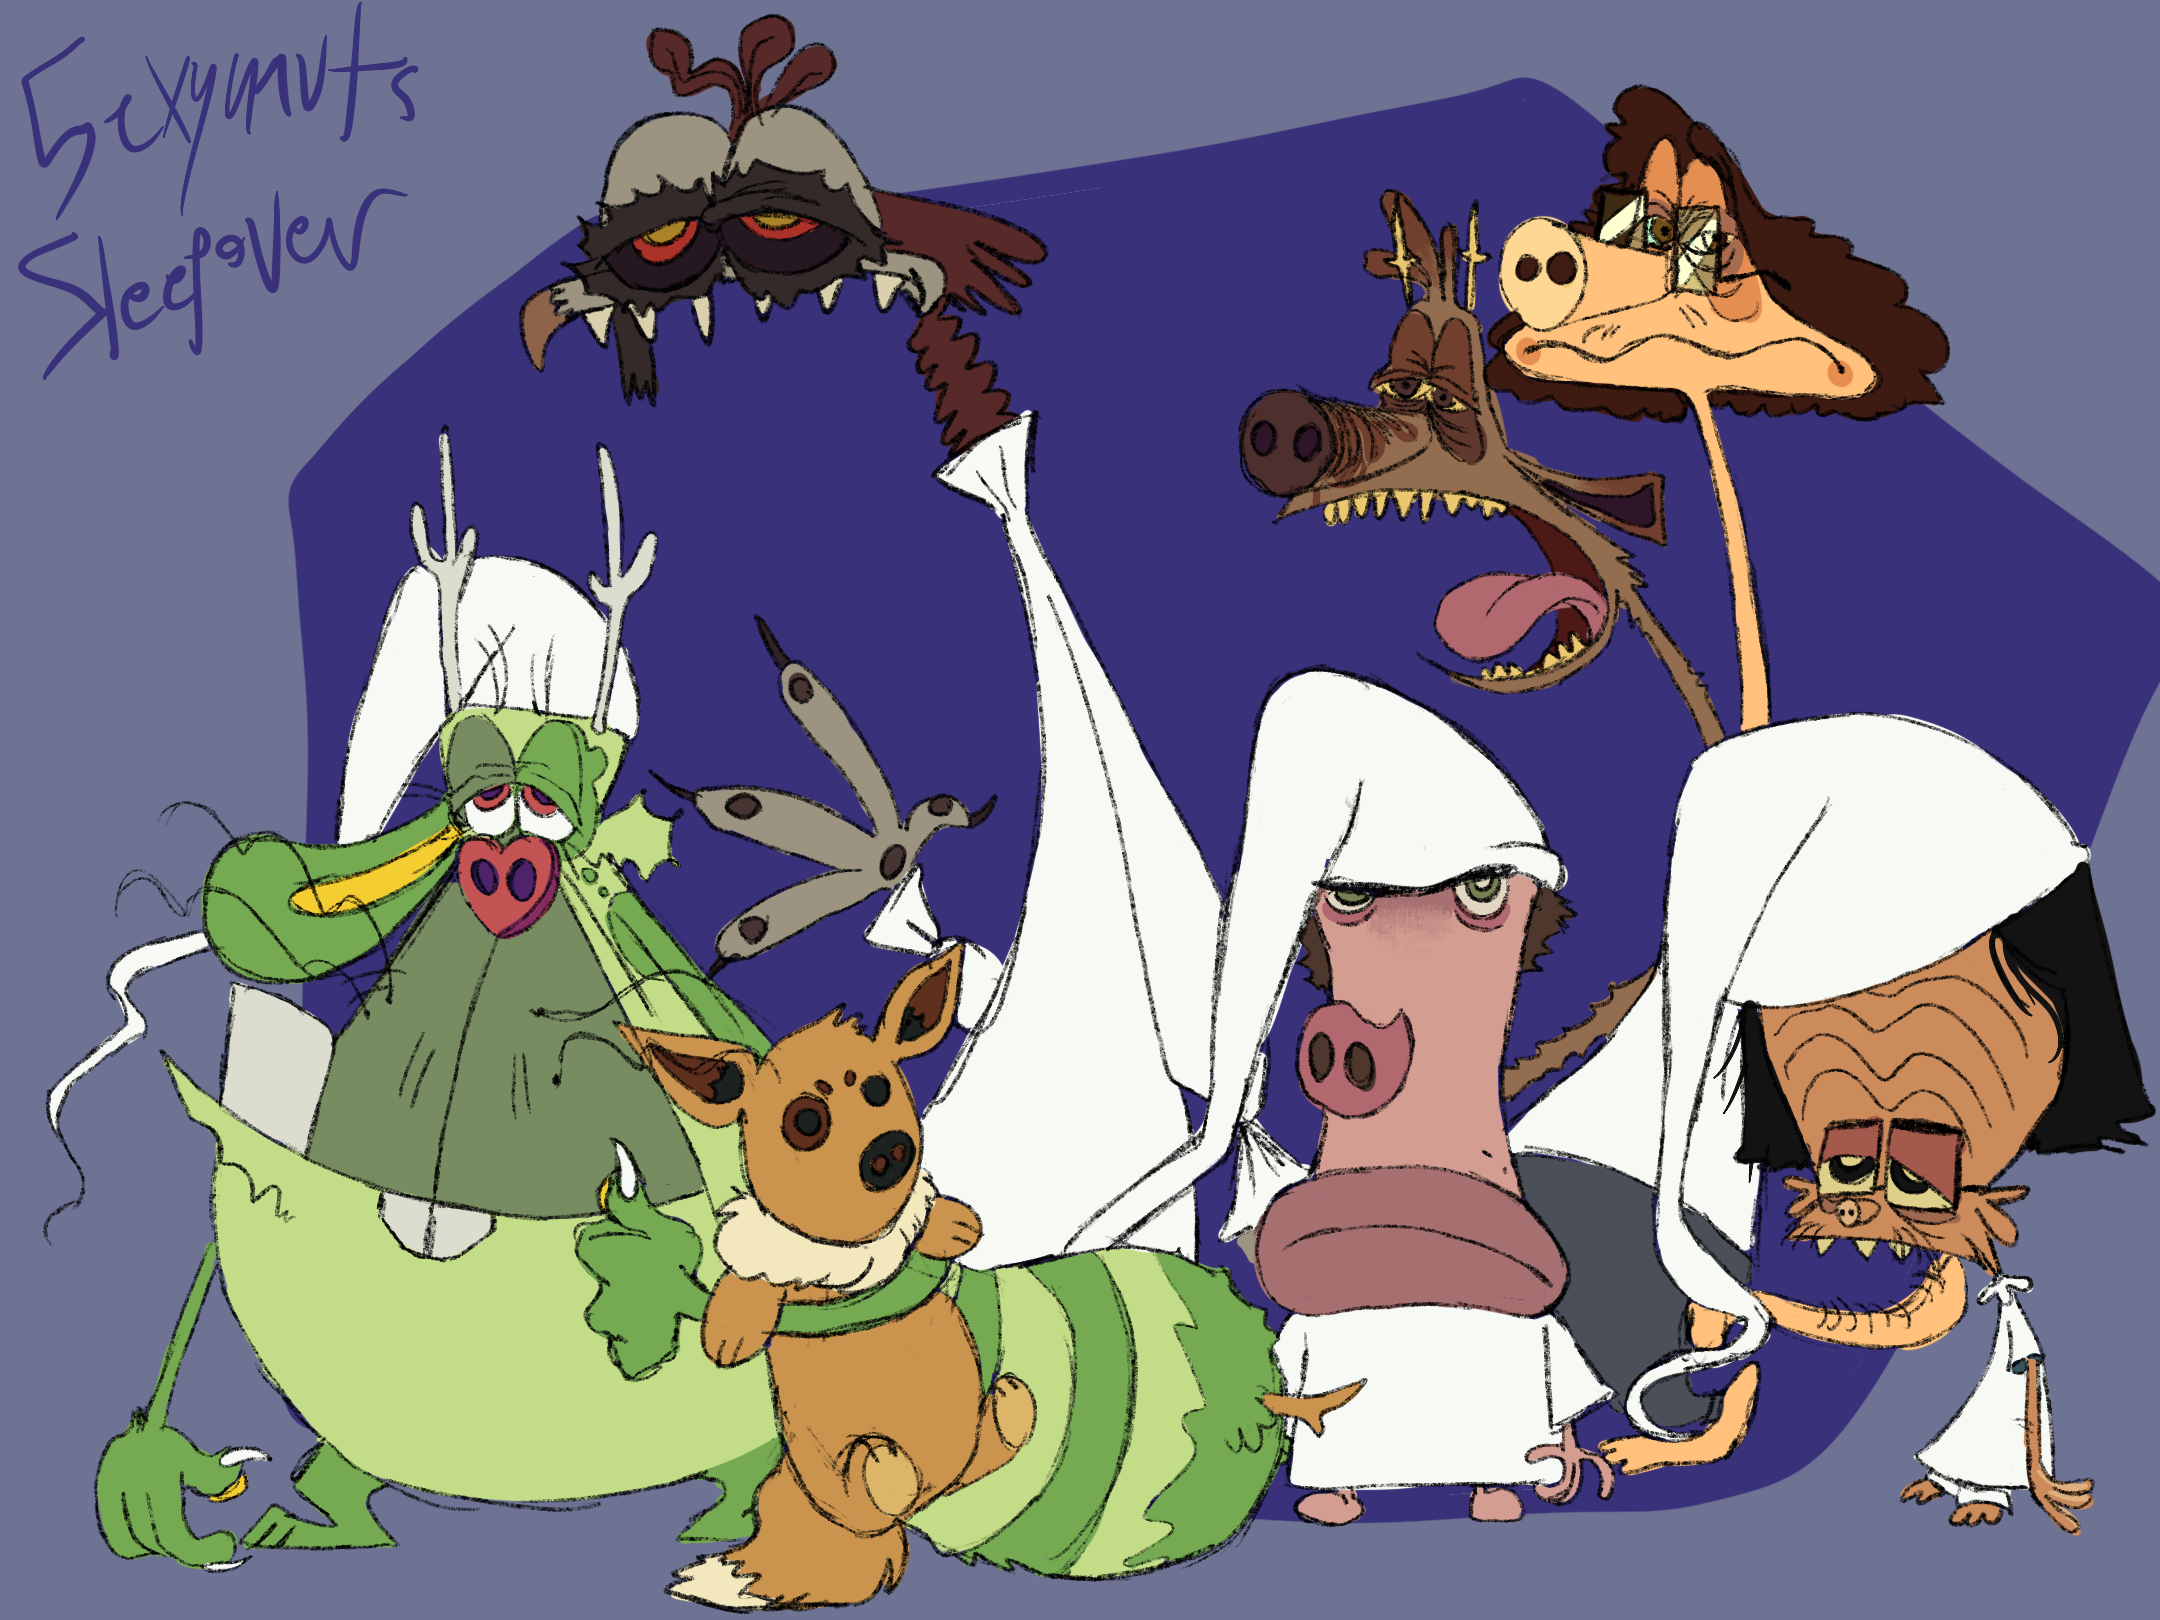 a traced over drawing of a space goofs image but as the sexyauts with the text 'Sexynauts Sleepover' by Xavier